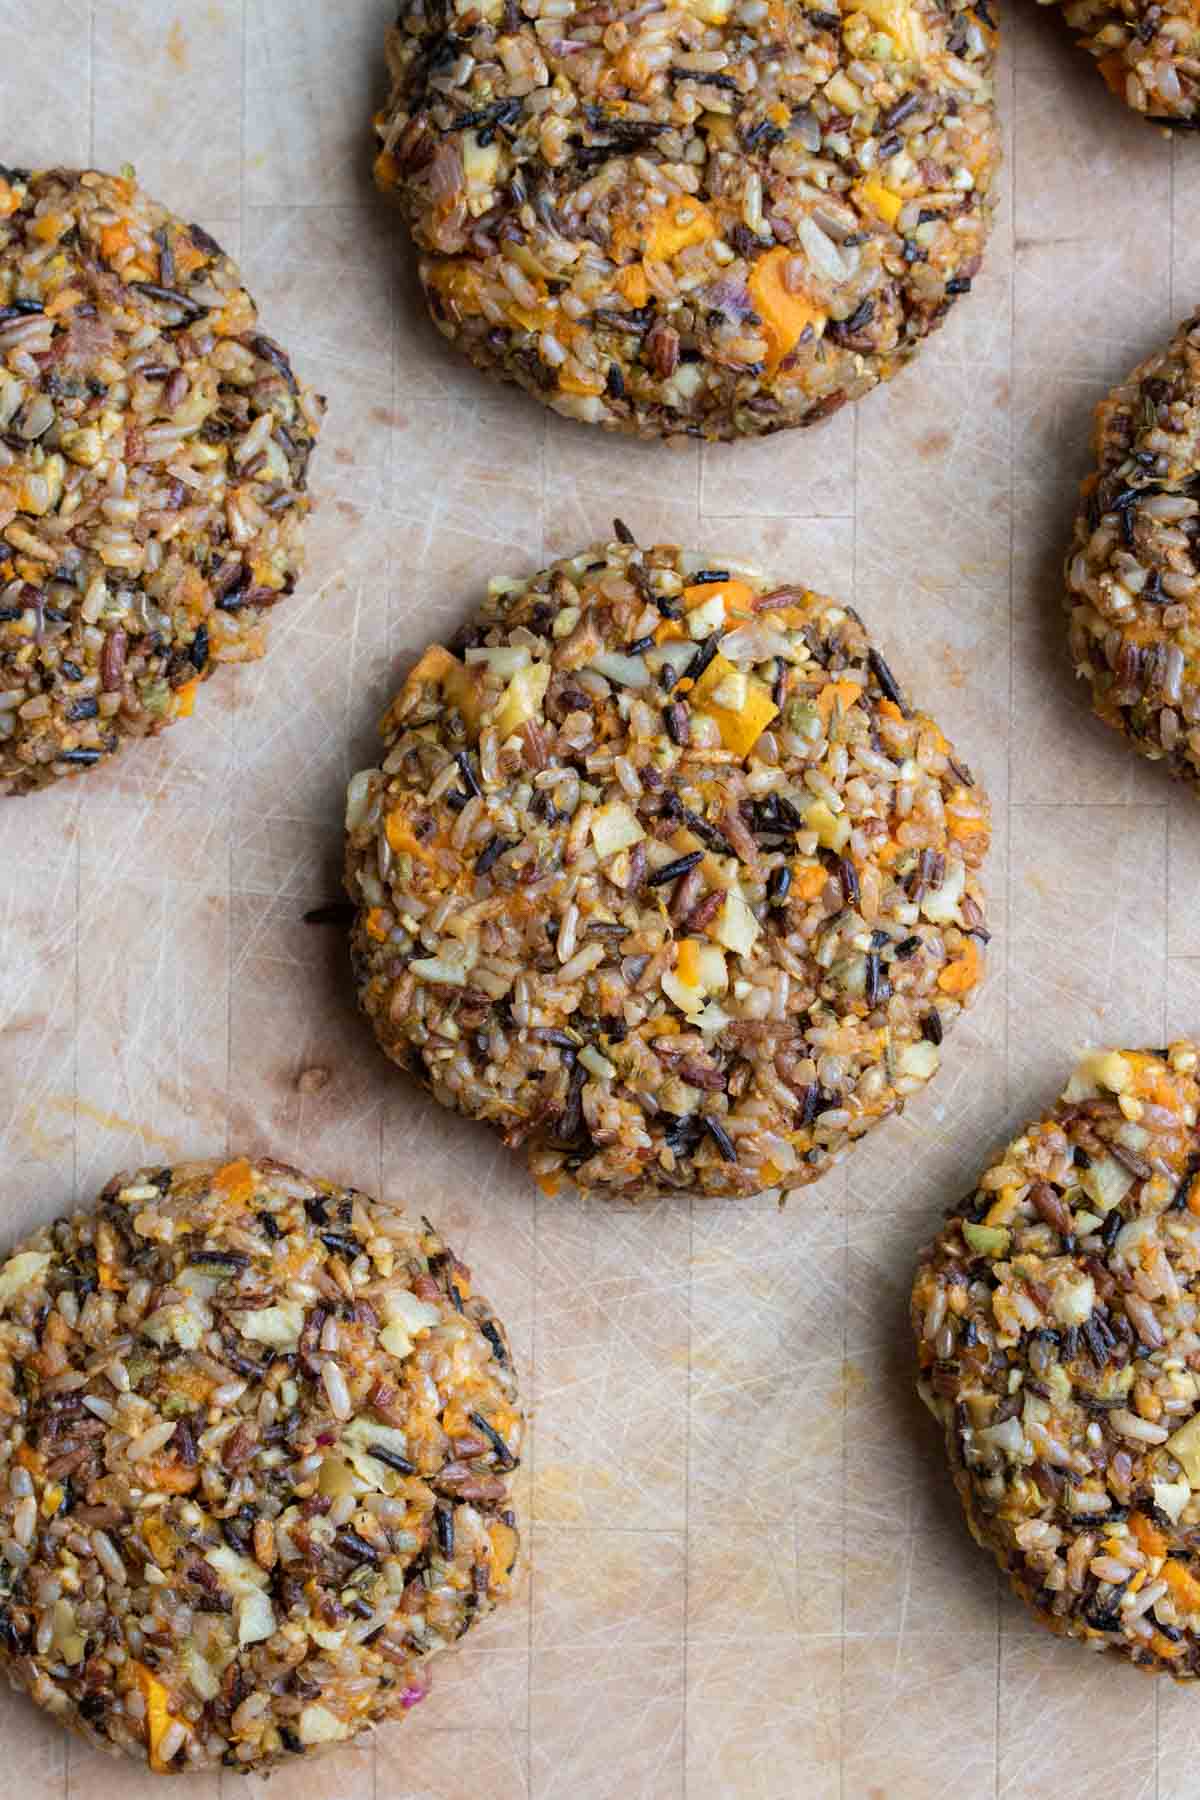 Raw butternut squash and wild rice burger patties on a wooden surface